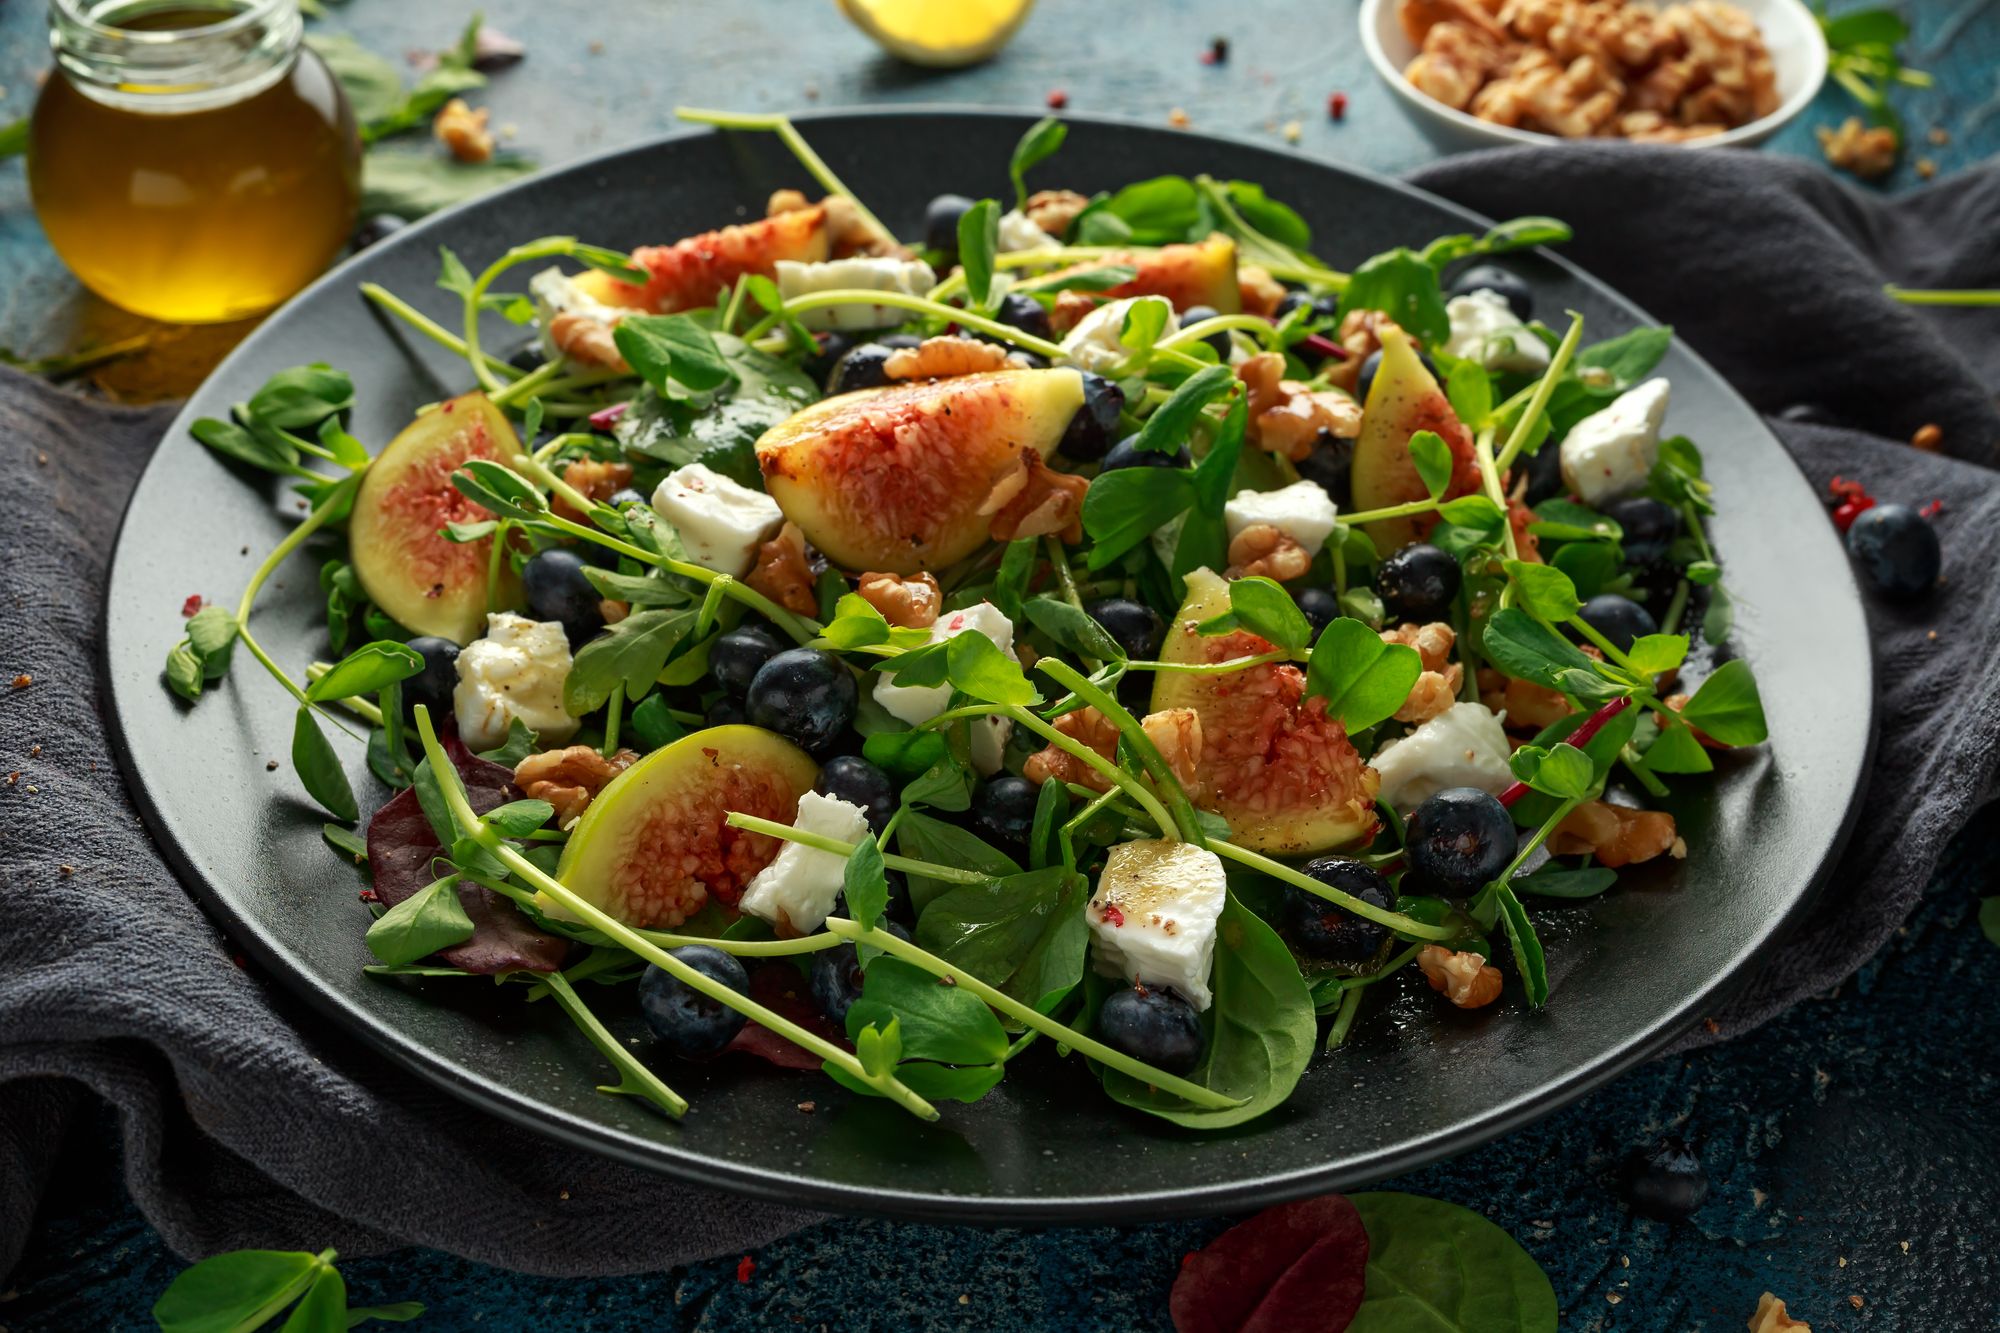 Salad with Grains, Blueberries and Feta